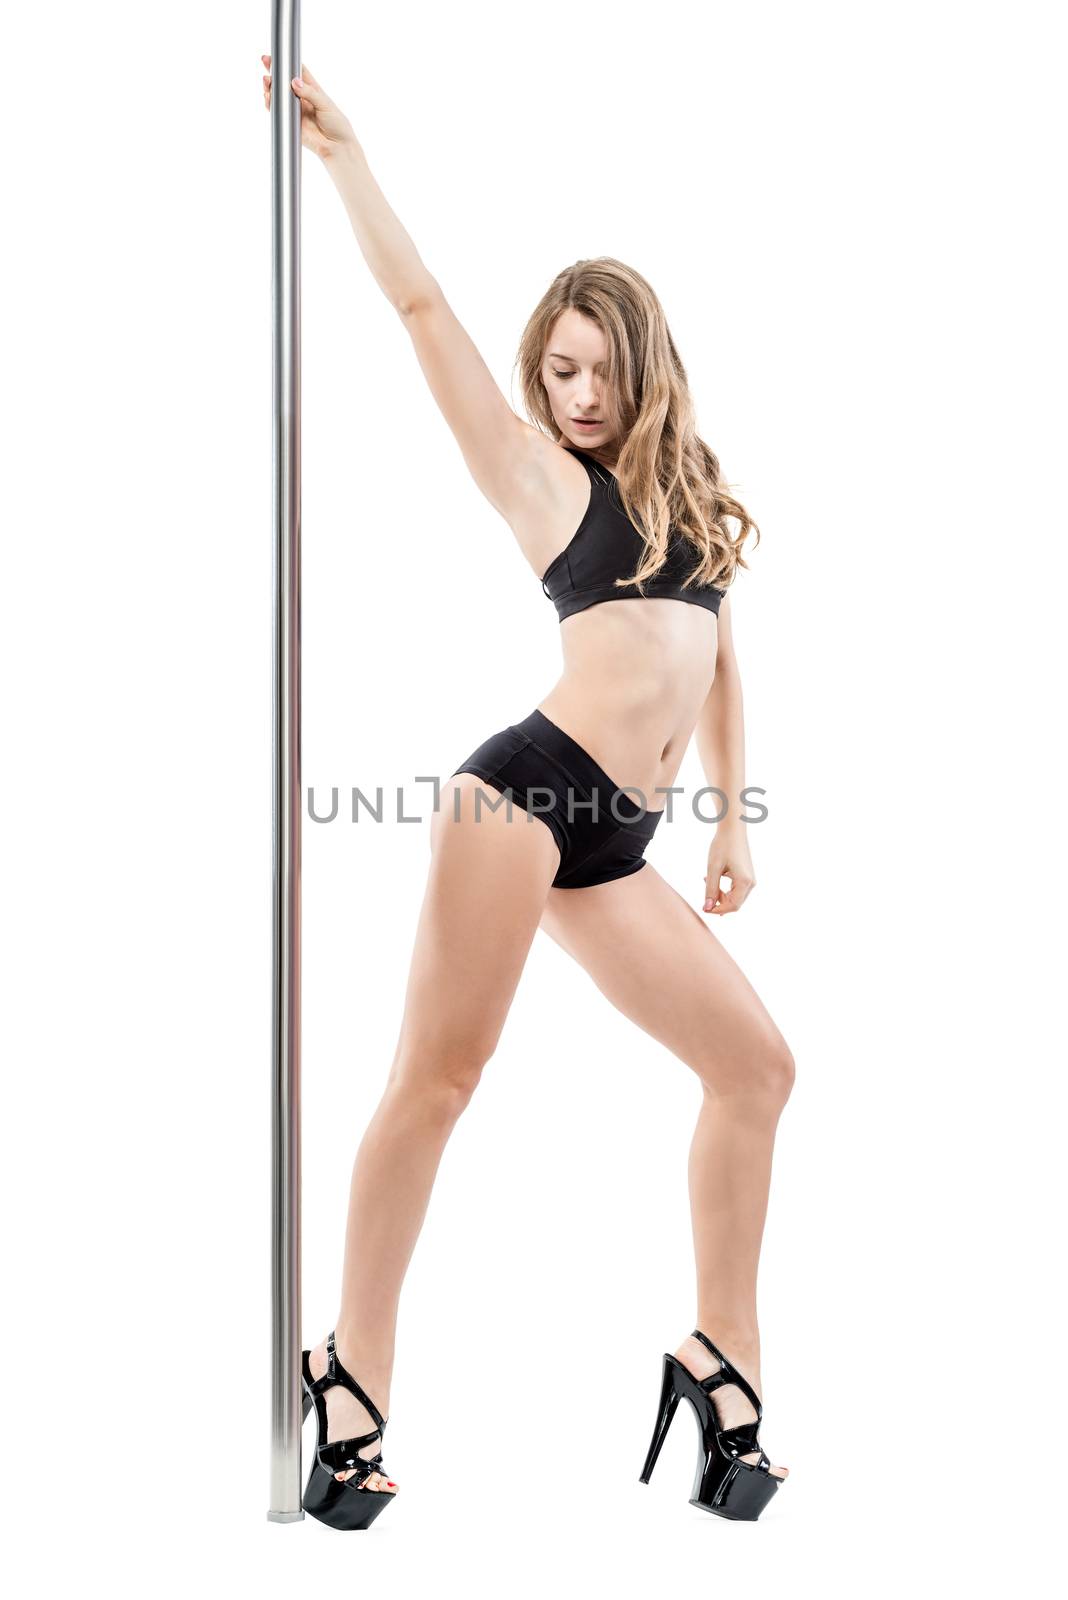 portrait of a sexy beautiful woman in lingerie and shoes at a pylon on a white background